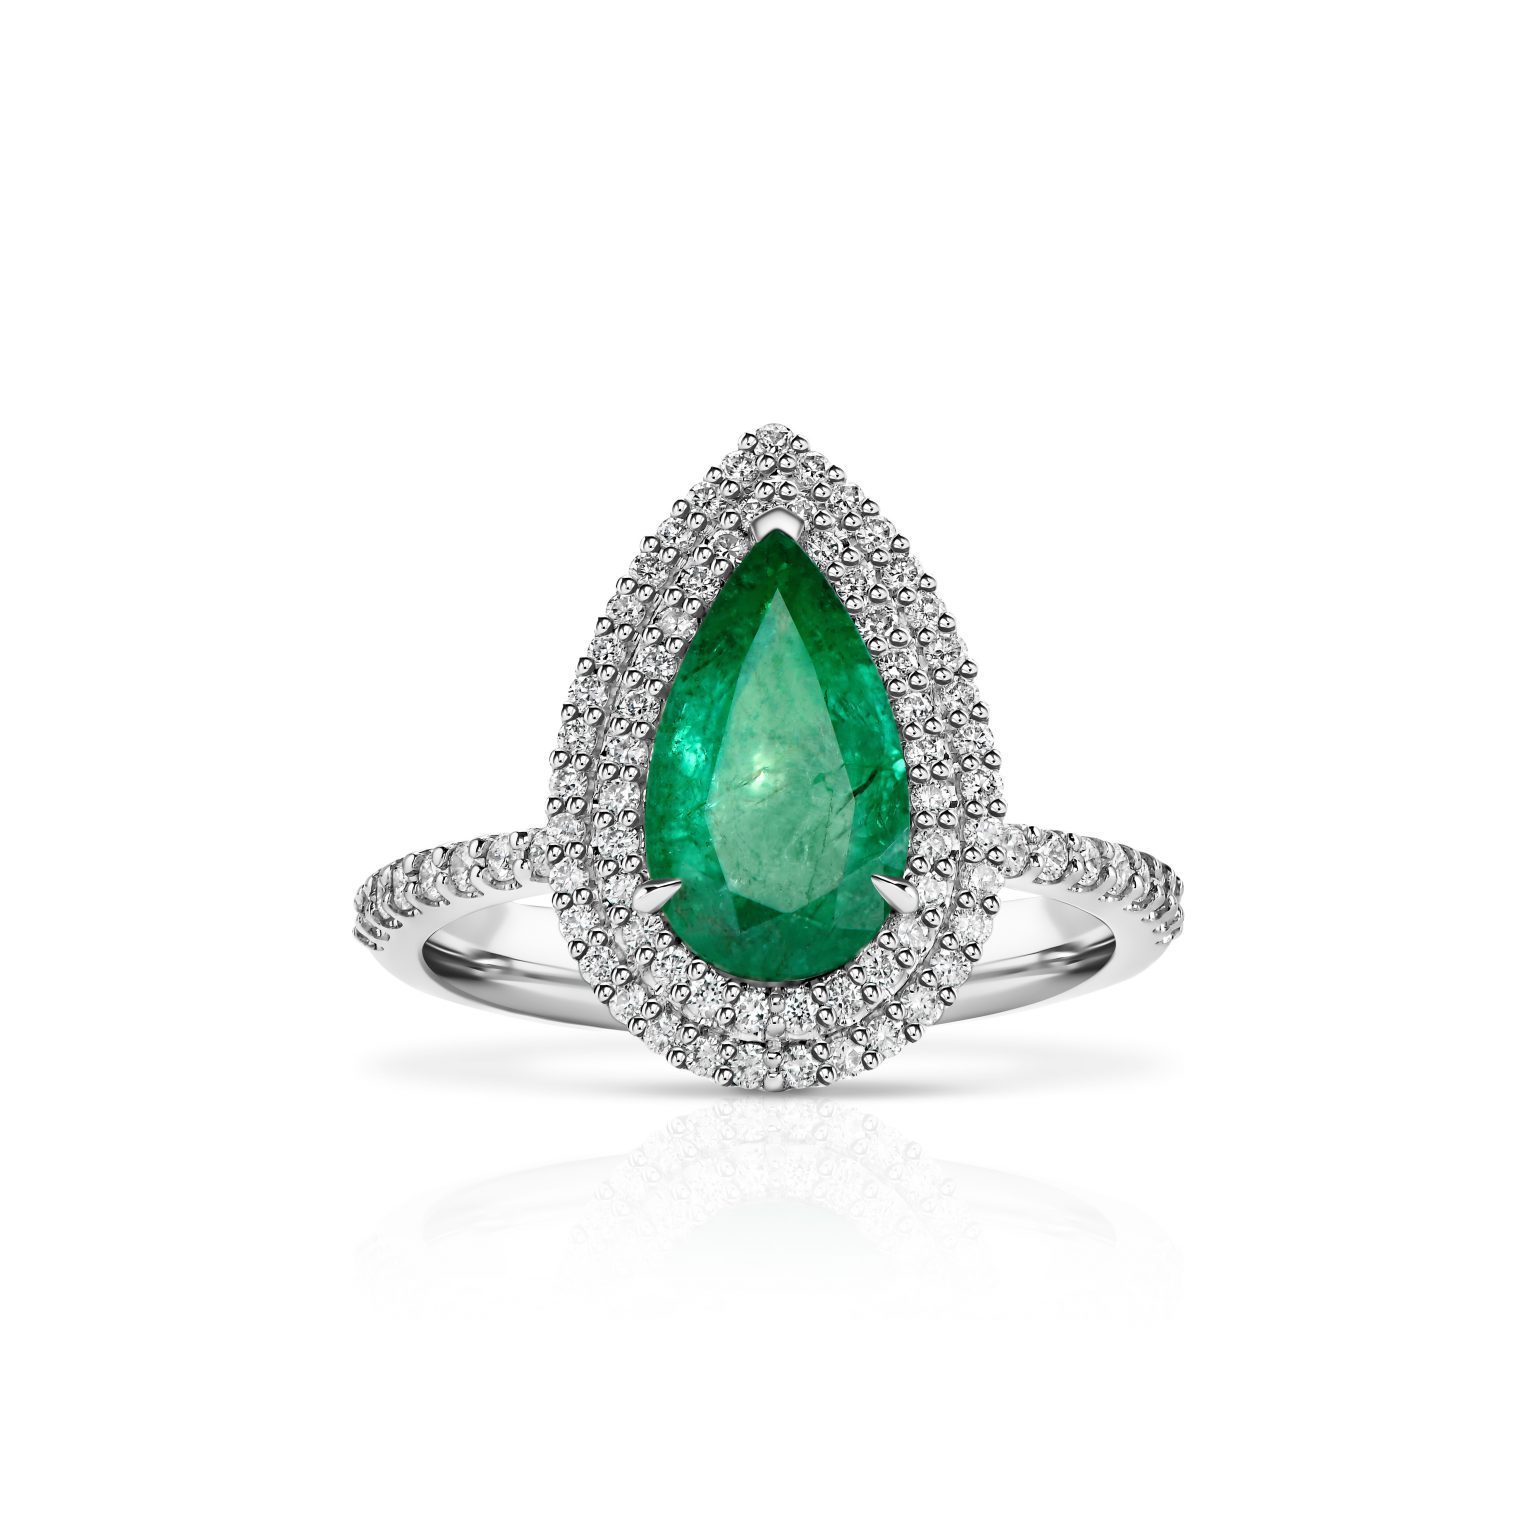 1.35 ct Pear-Shaped Green Emerald Ring